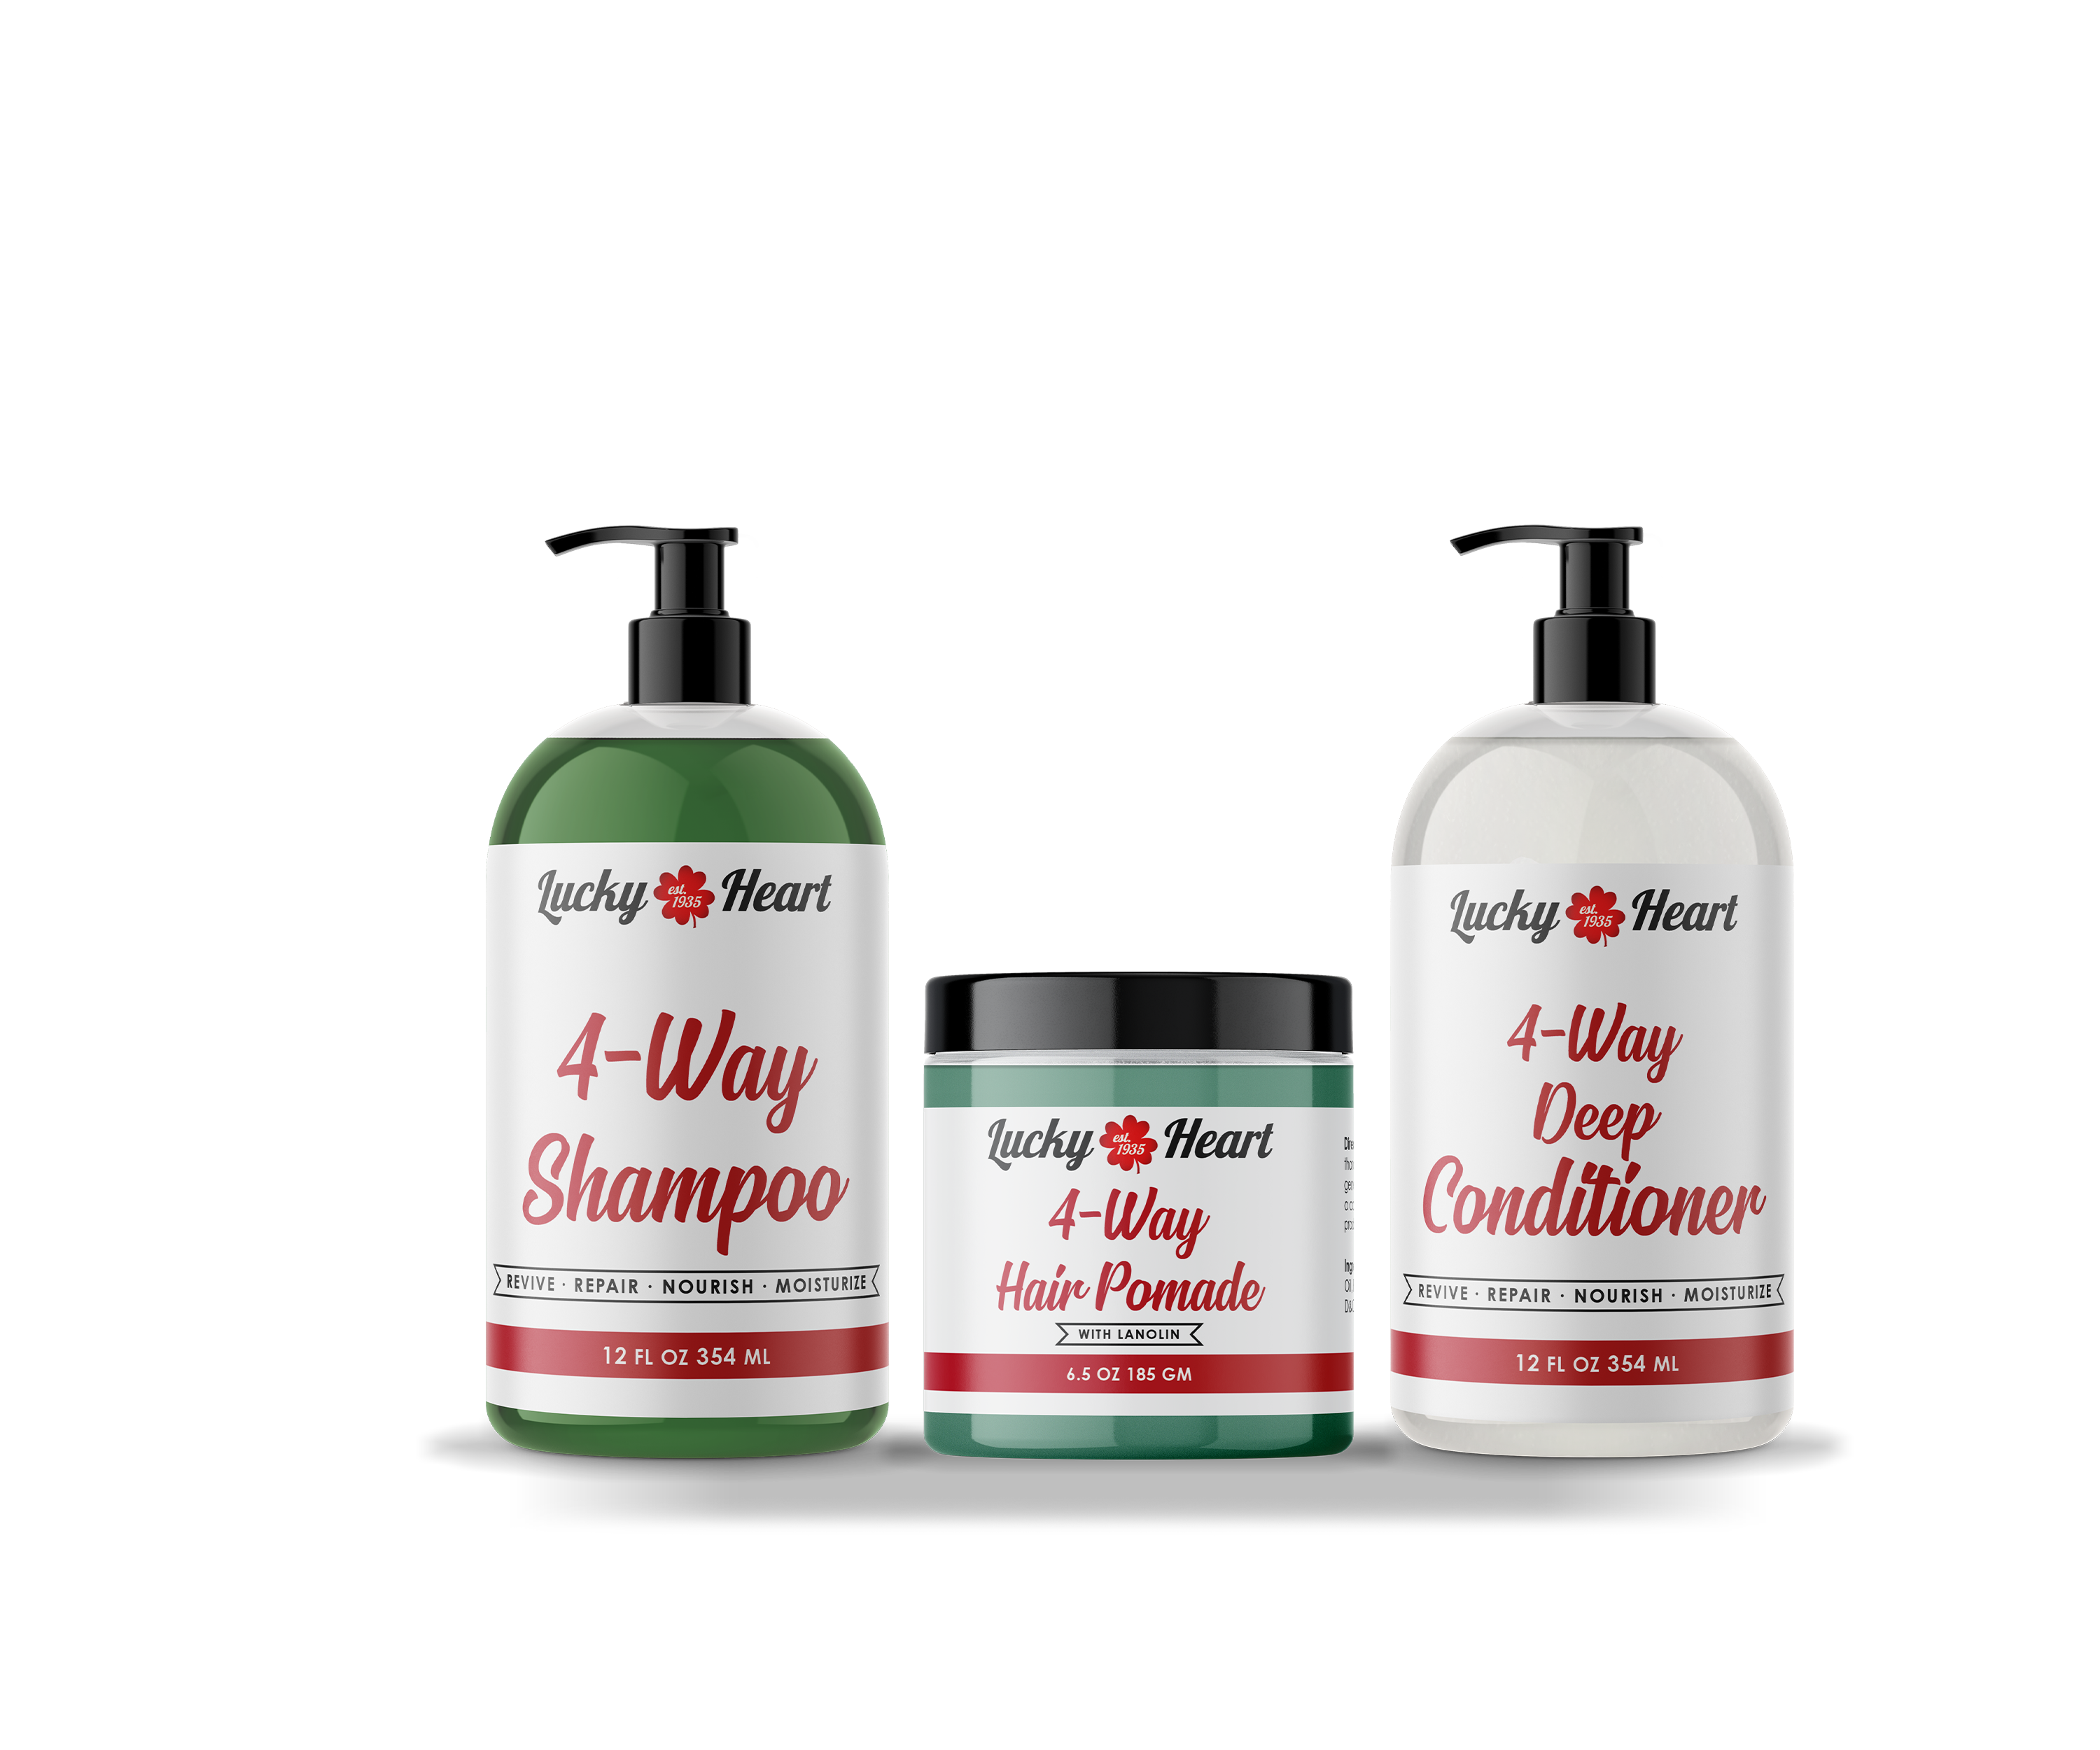 4-Way gift set featuring shampoo, deep conditioner, and 6.5 oz hair pomade by Lucky Heart Cosmetics